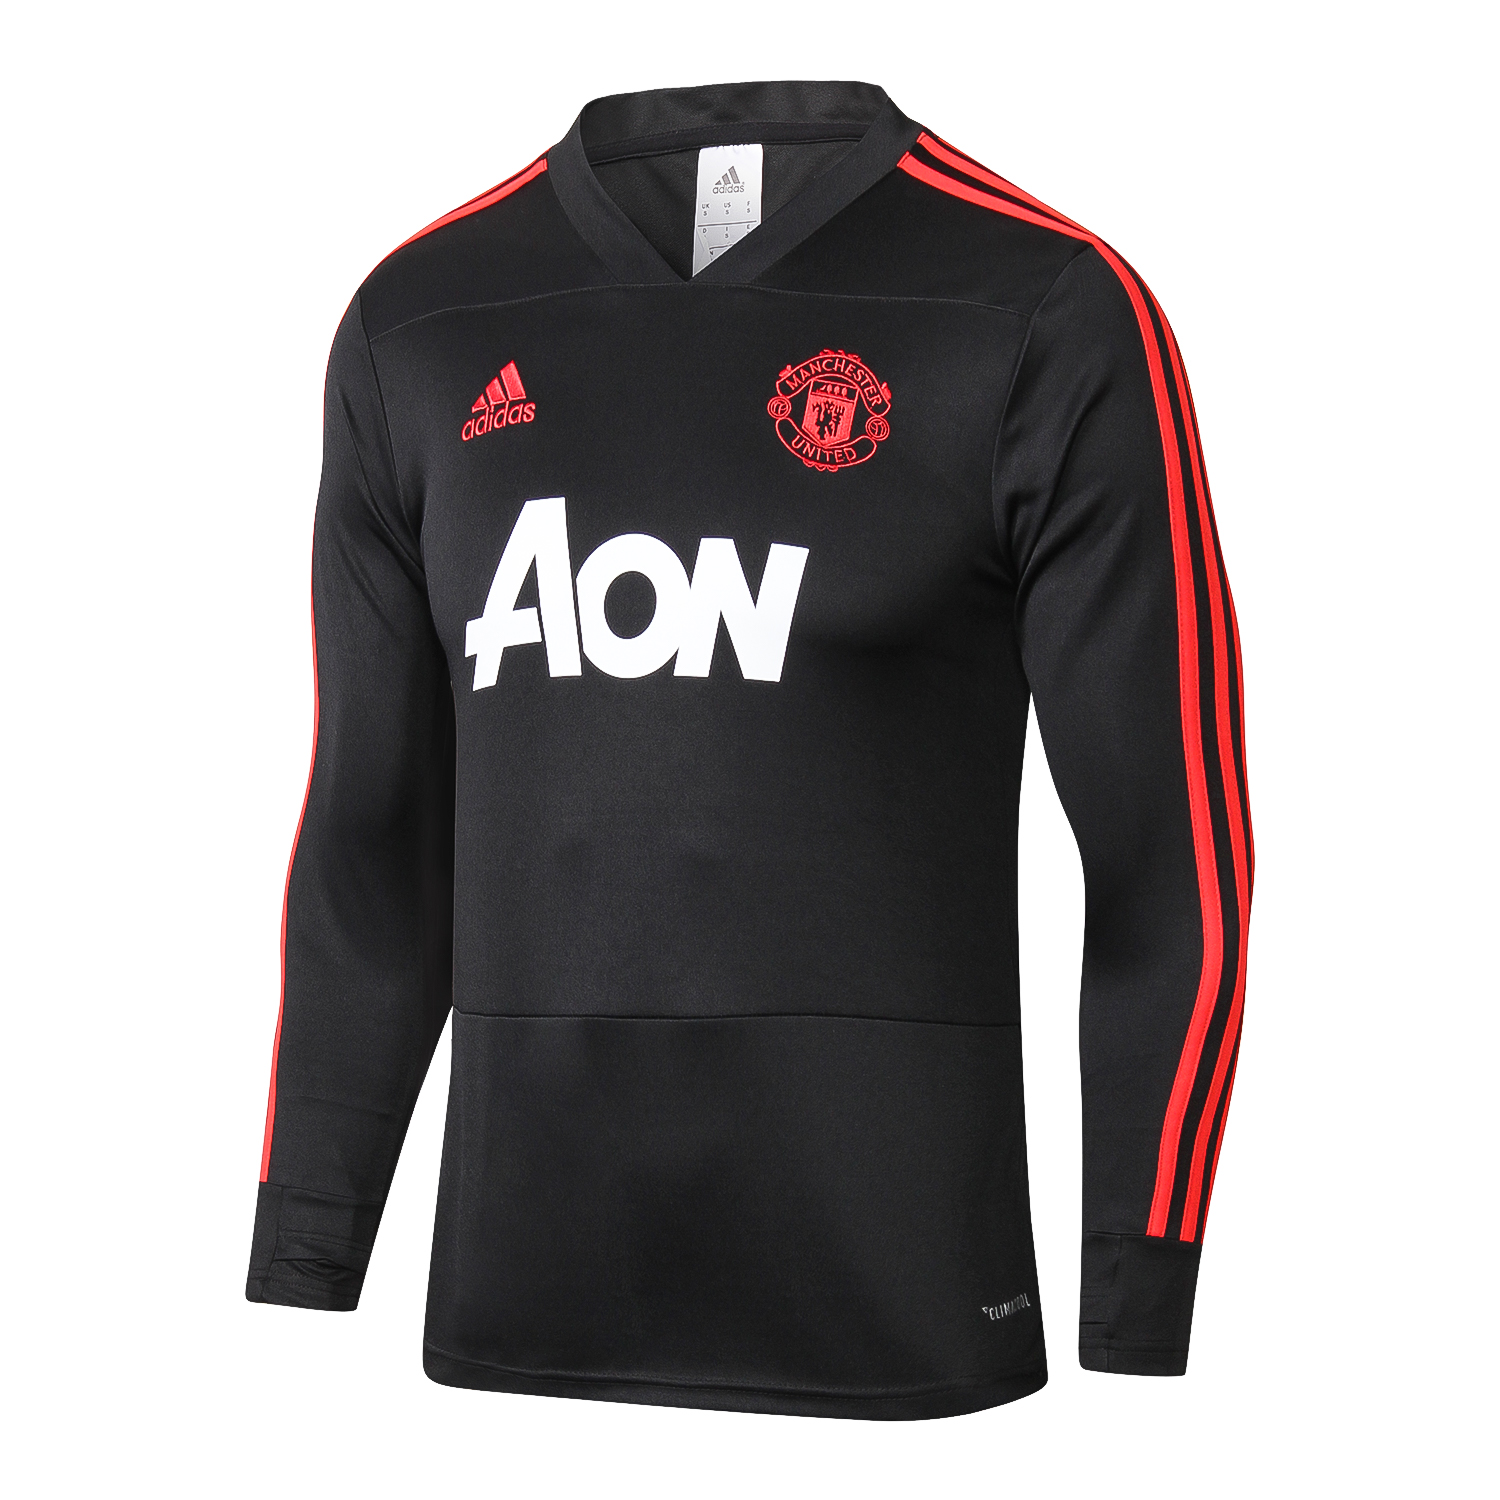 jersey training manchester united 2018